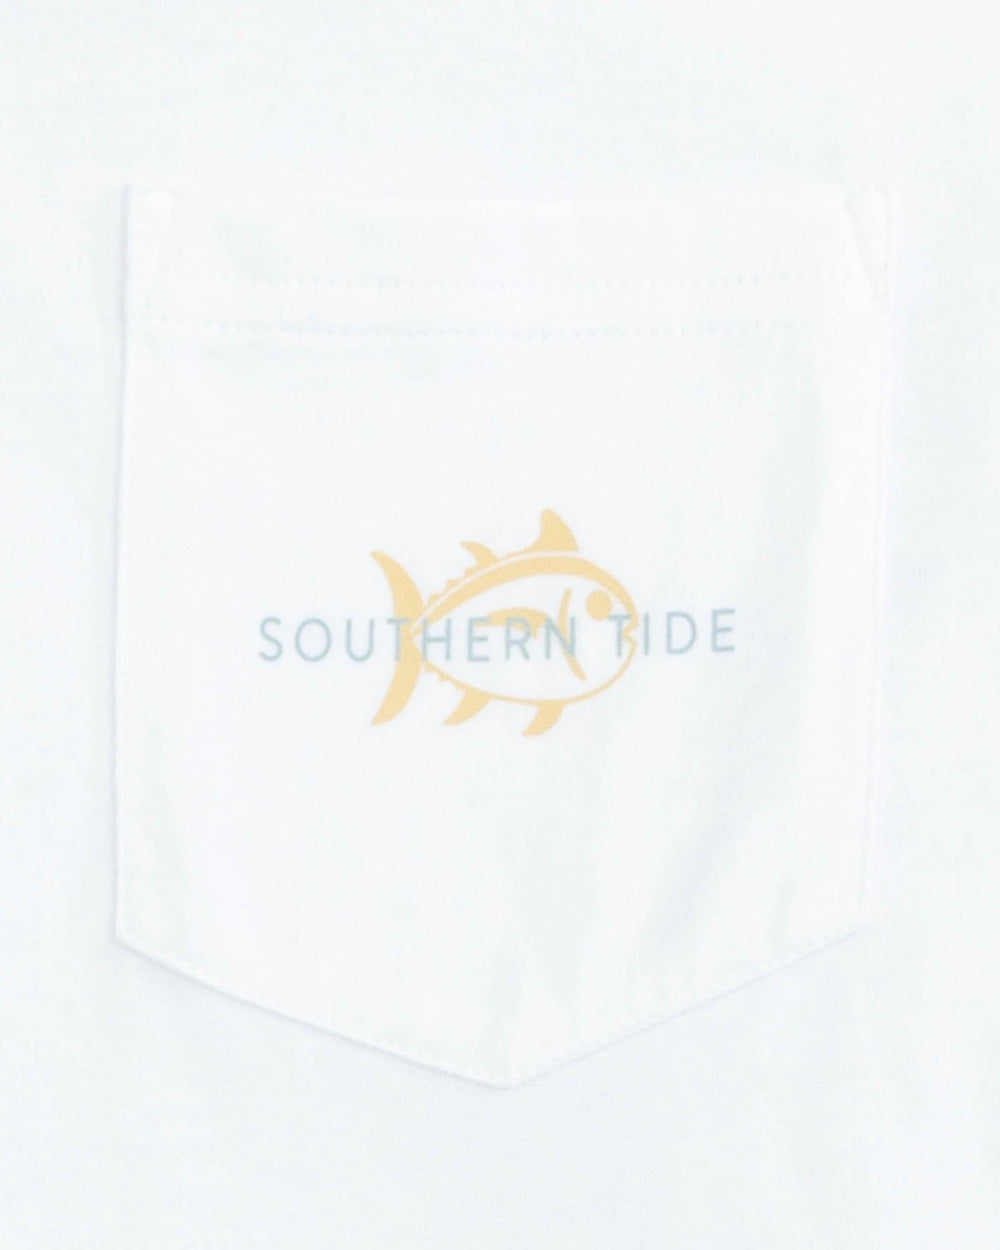 The detail view of the Southern Tide Sunset Split Short Sleeve T-Shirt by Southern Tide - Classic White